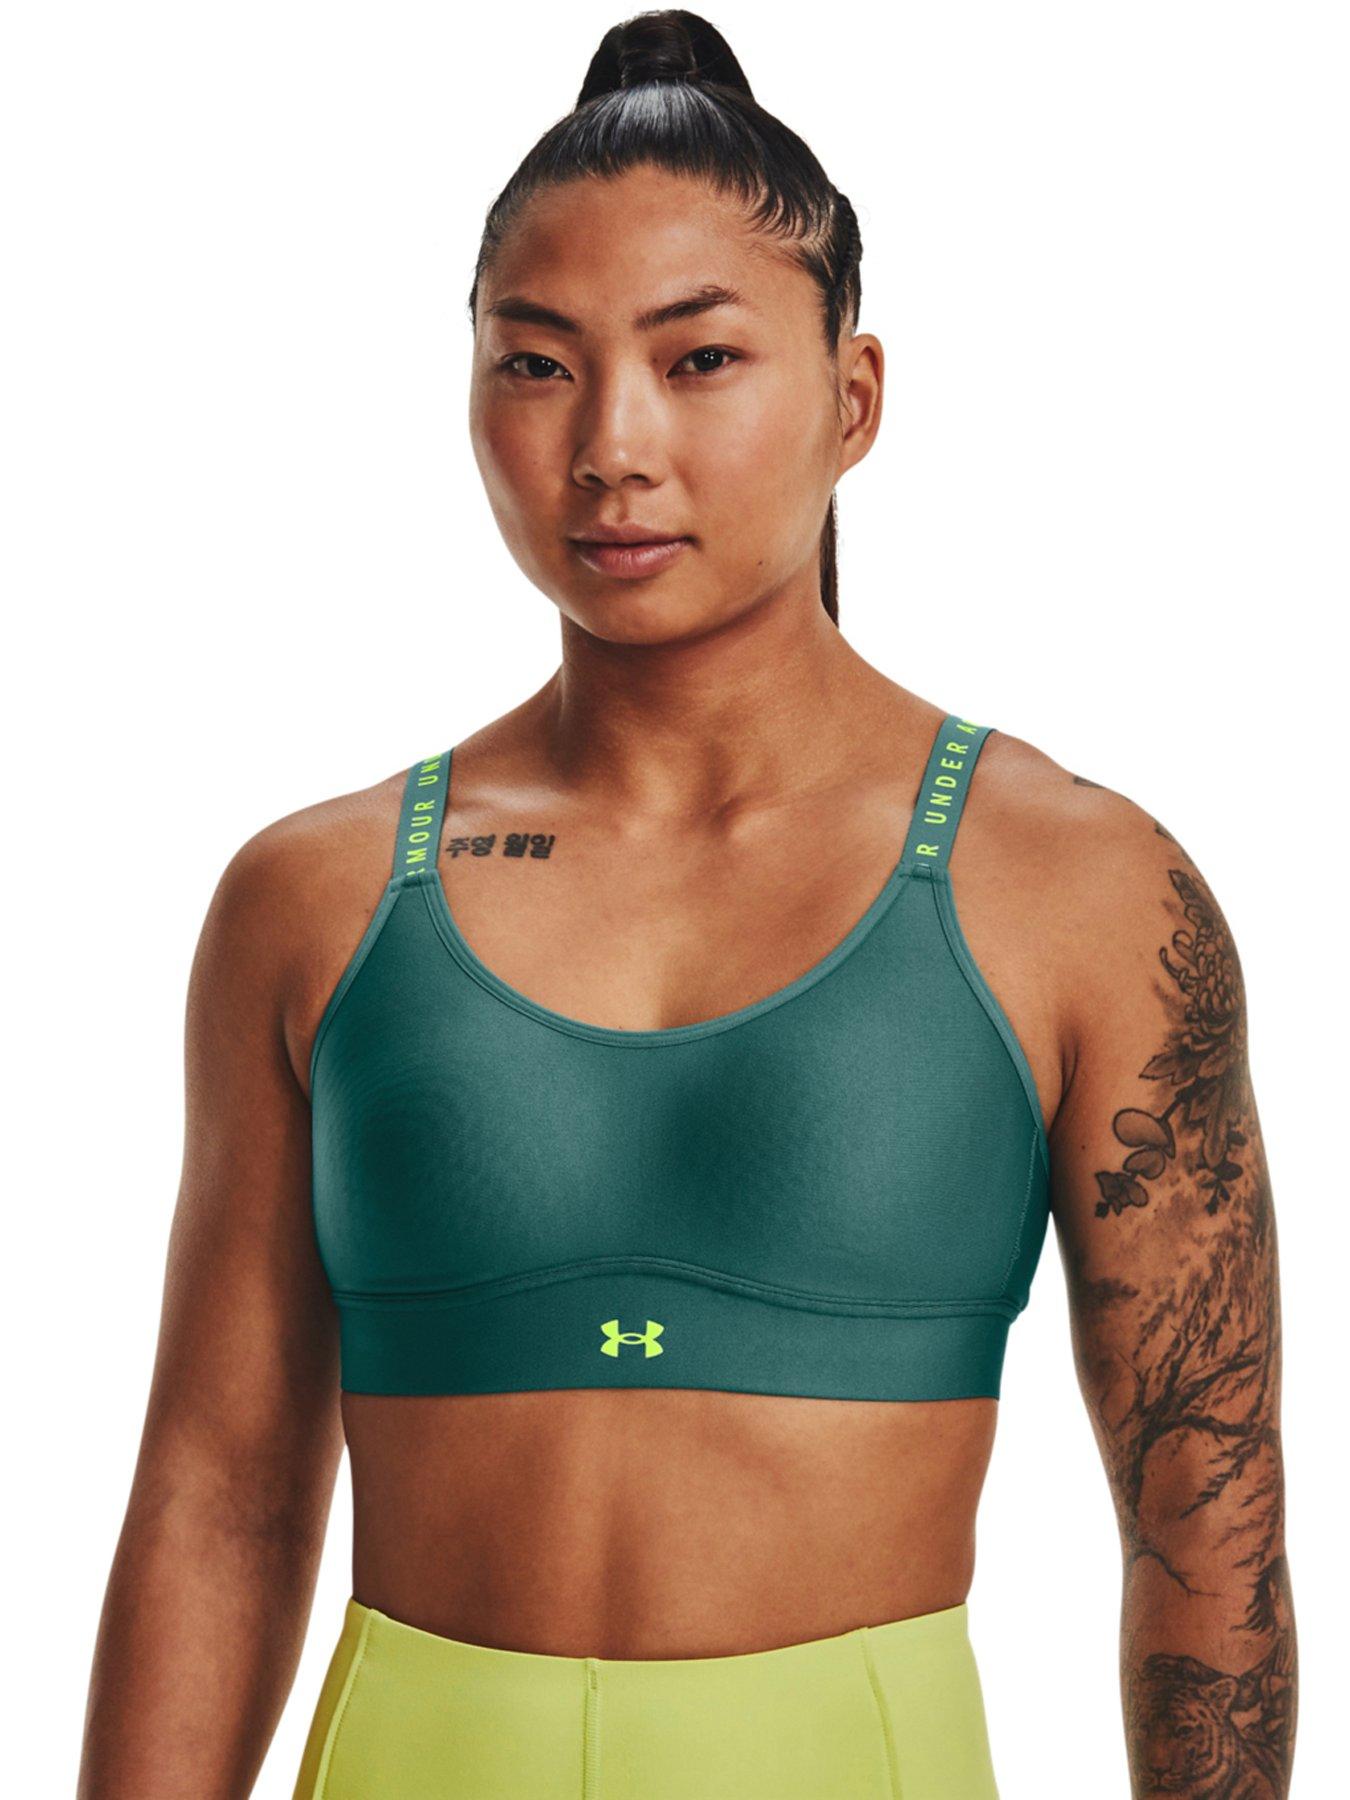  Under Armour Women's Infinity High Impact Sports Bra D-DD,  (001) Black / / White, Small : Clothing, Shoes & Jewelry